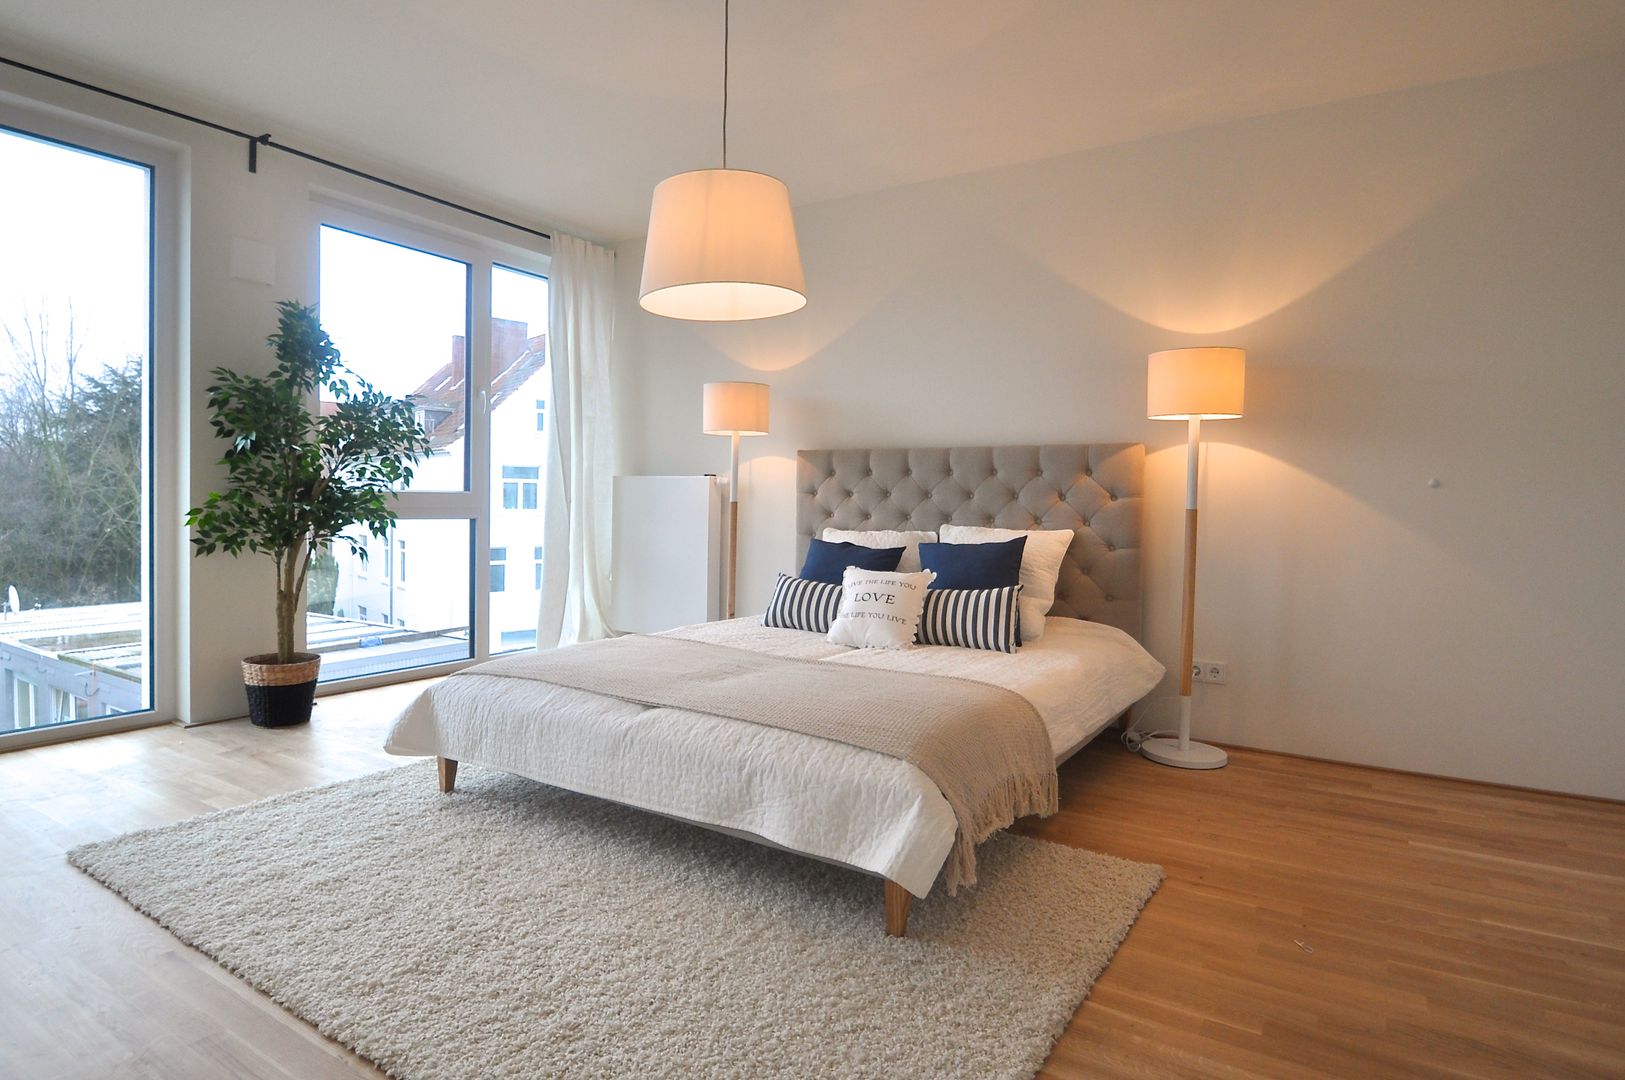 Musterwohnung 'Ton in Ton', K. A. K. A. Chambre scandinave